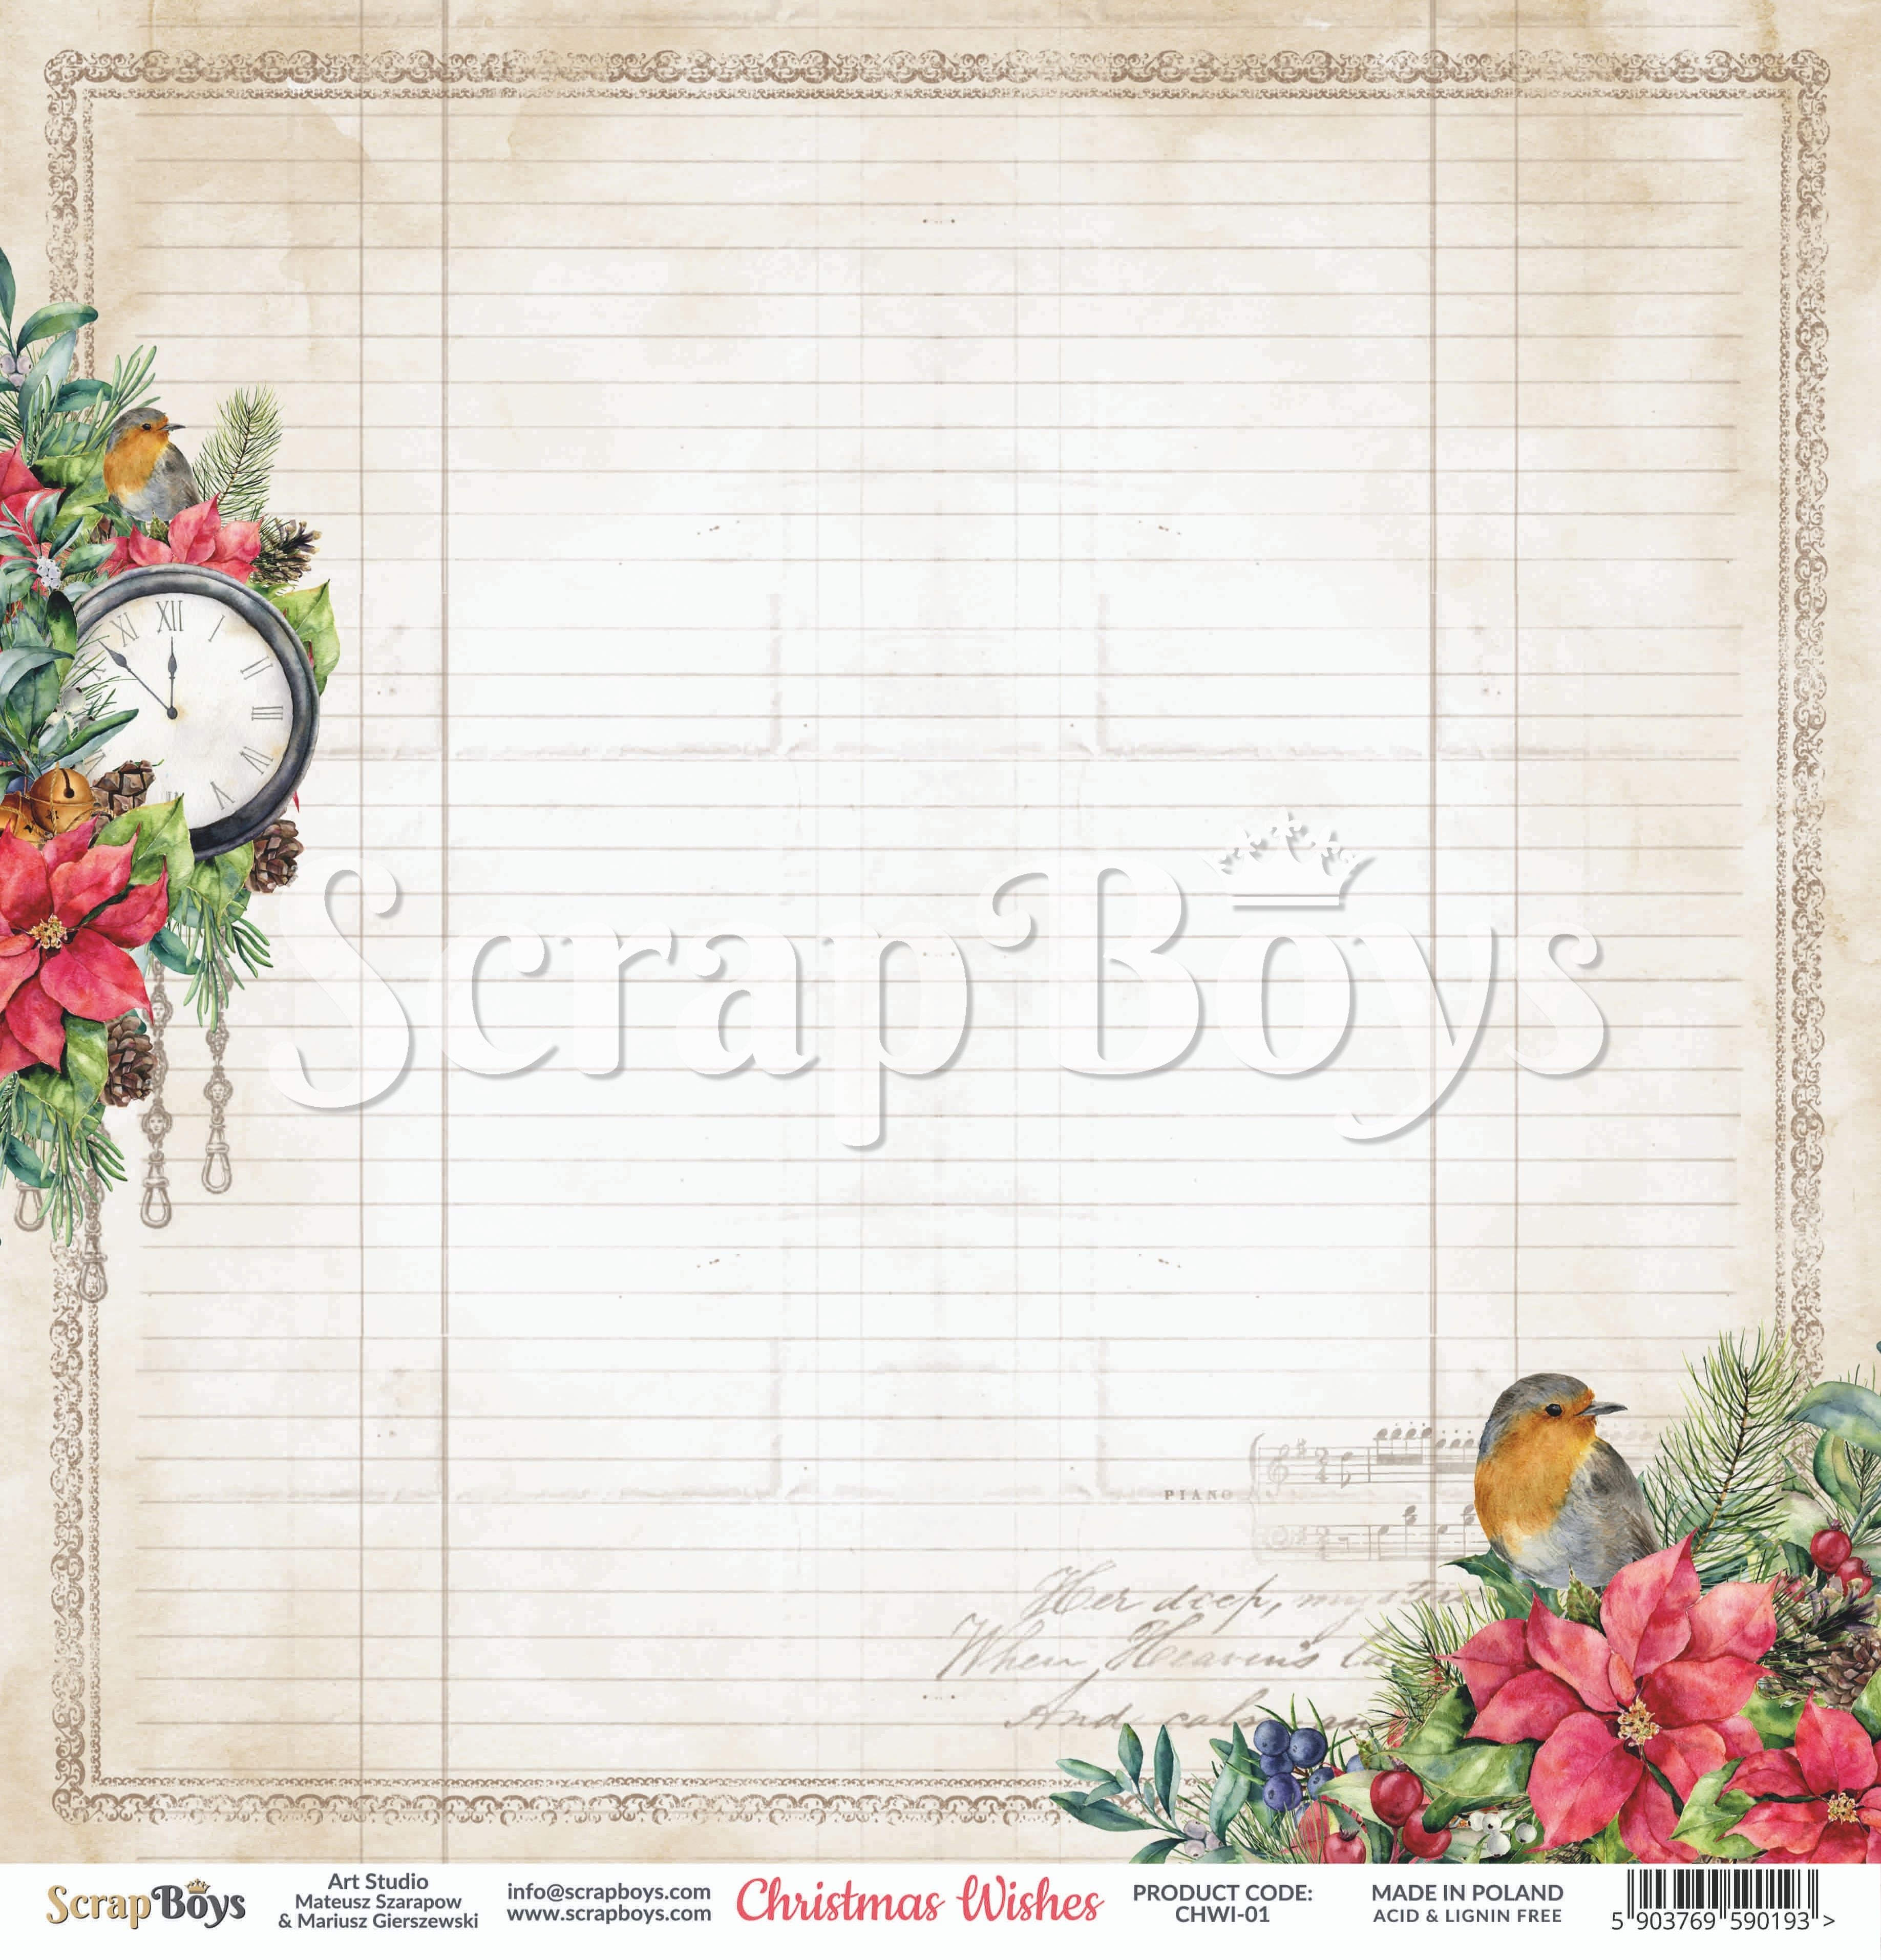 Scrapboys -  Christmas Wishes - 01 - 12x12"